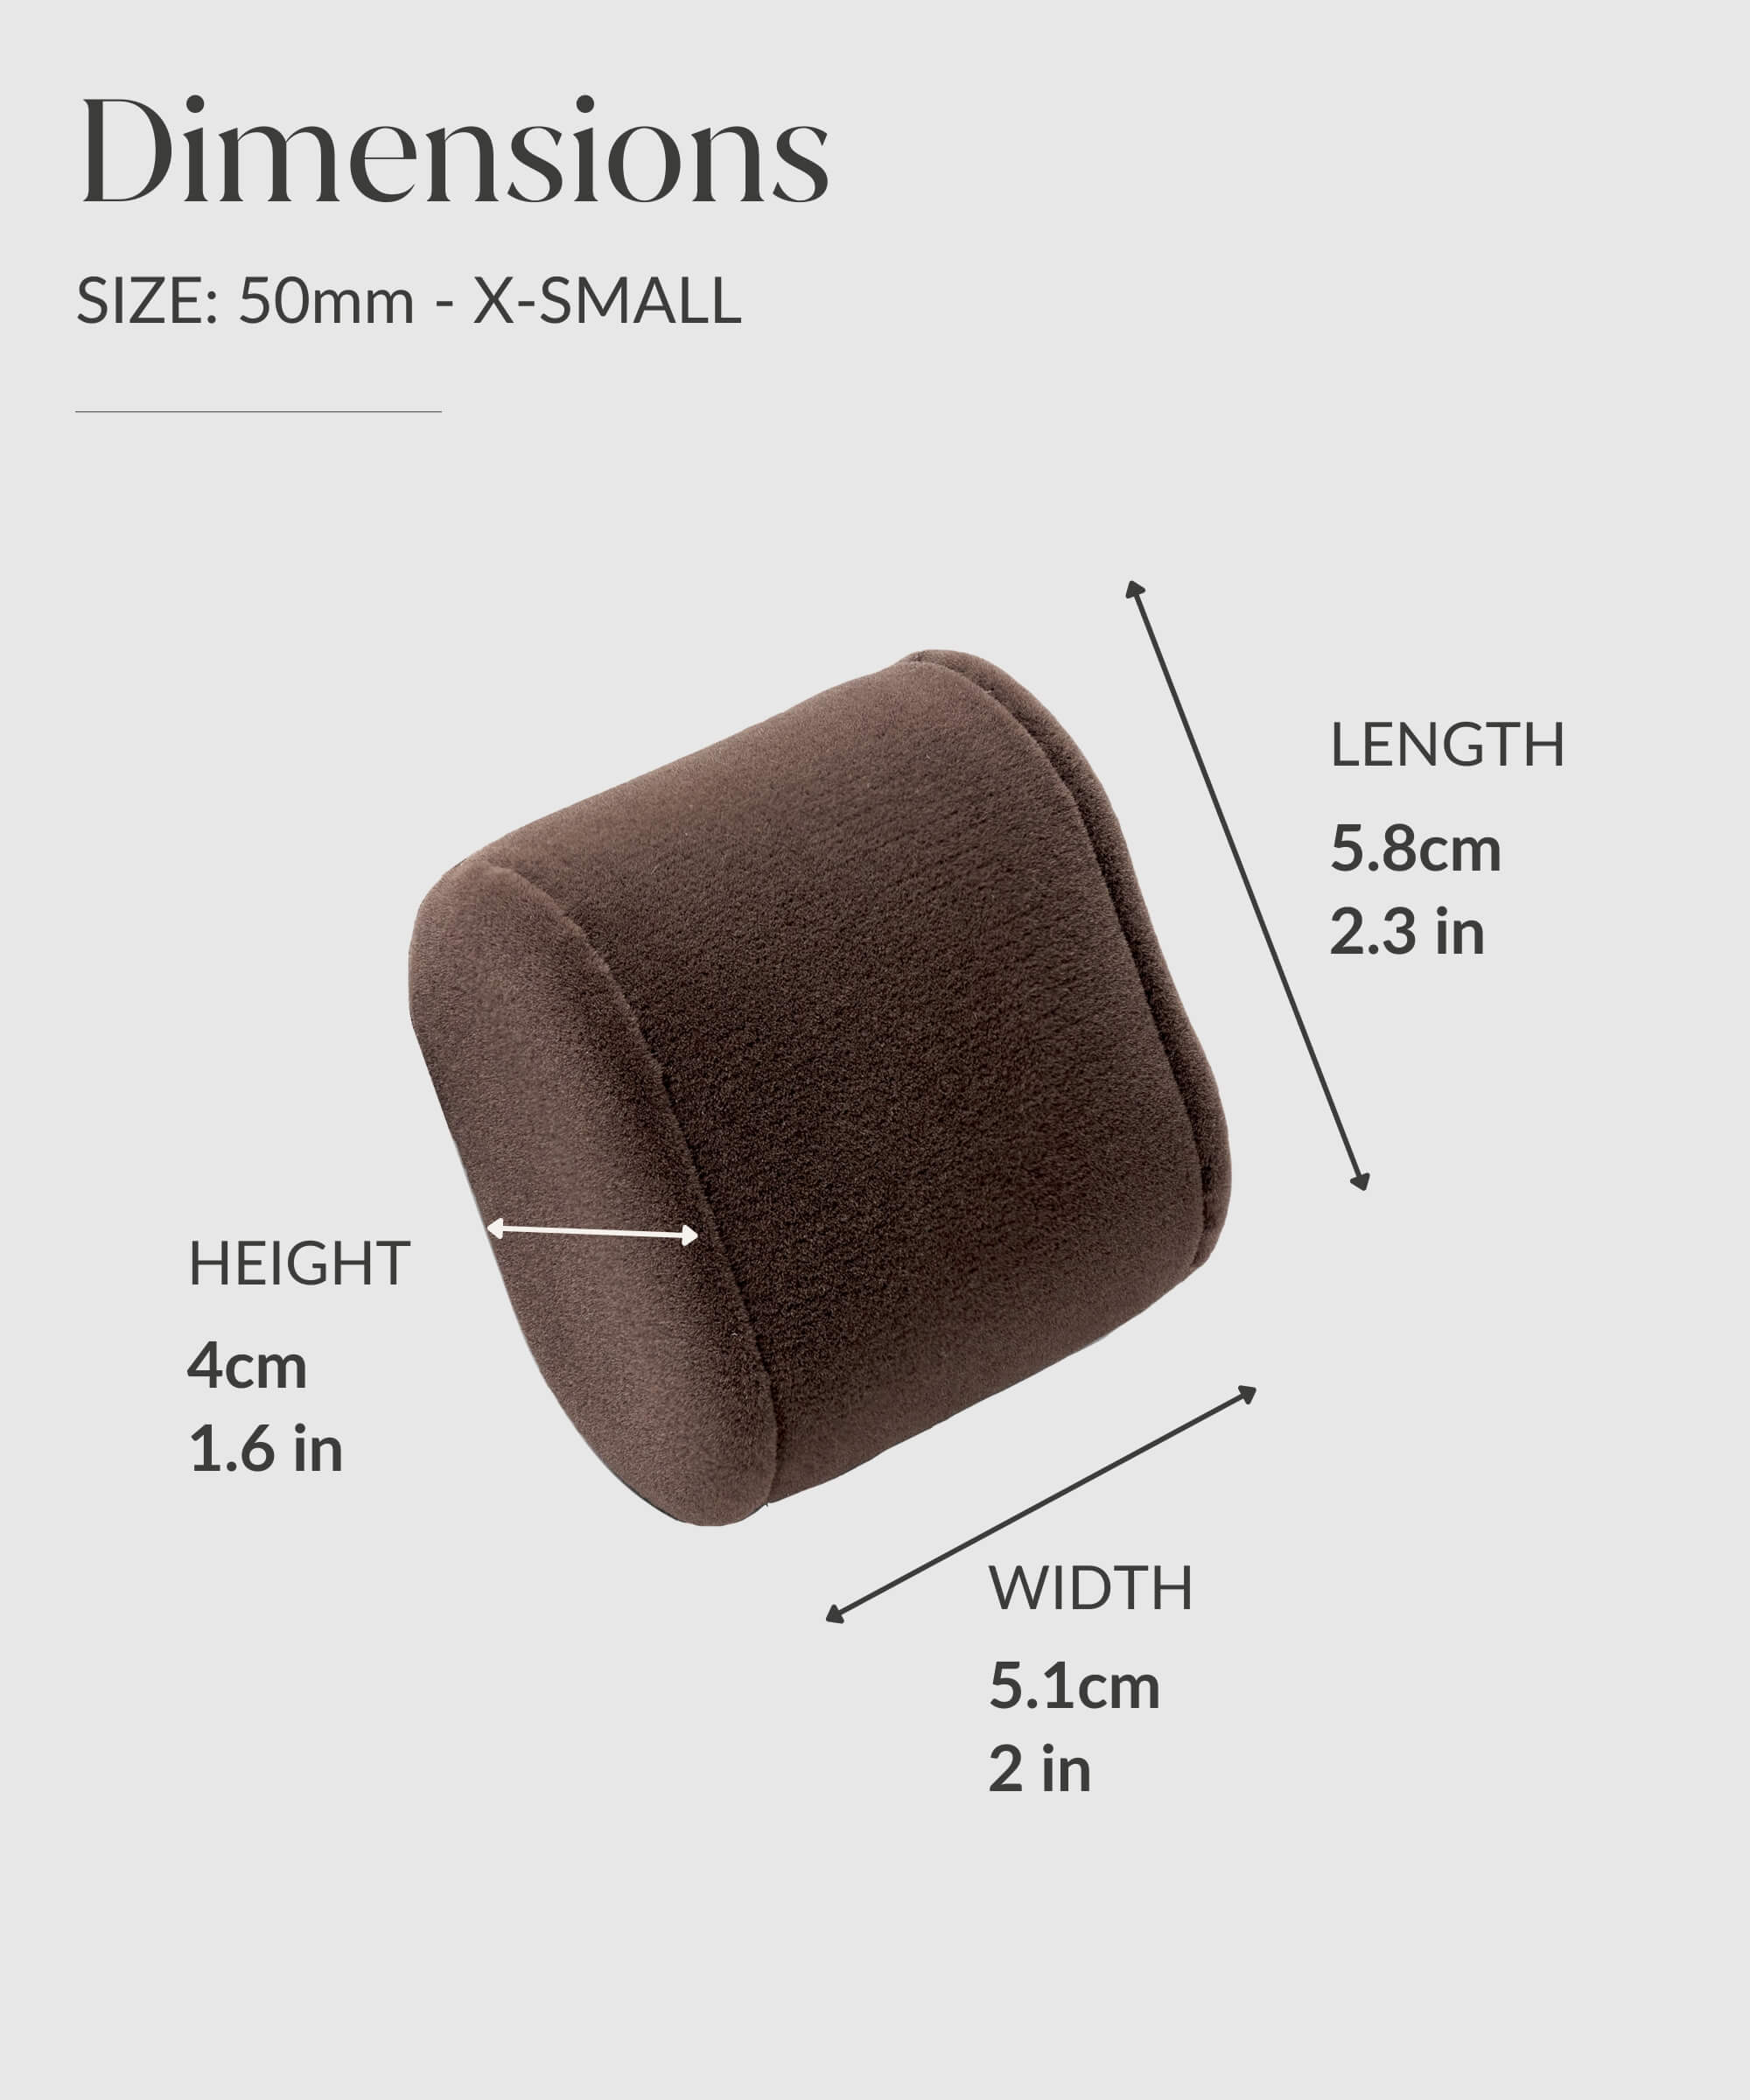 A diagram illustrating the dimensions of TAWBURY Bayswater Replacement Watch Box Pillows - 50mm - X-Small.